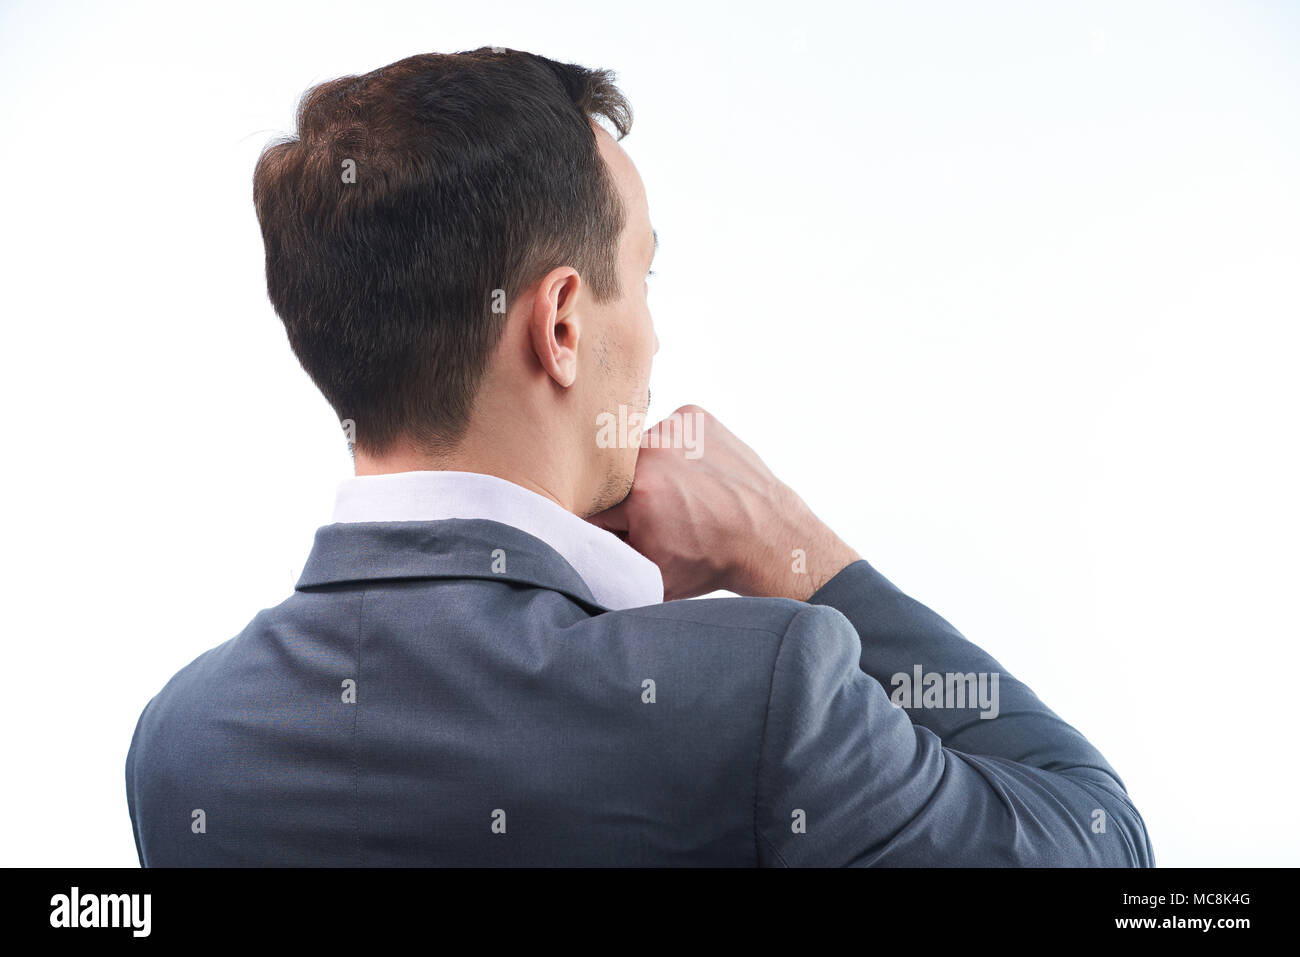 Back view of thinking man. Man with hand under chin Stock Photo